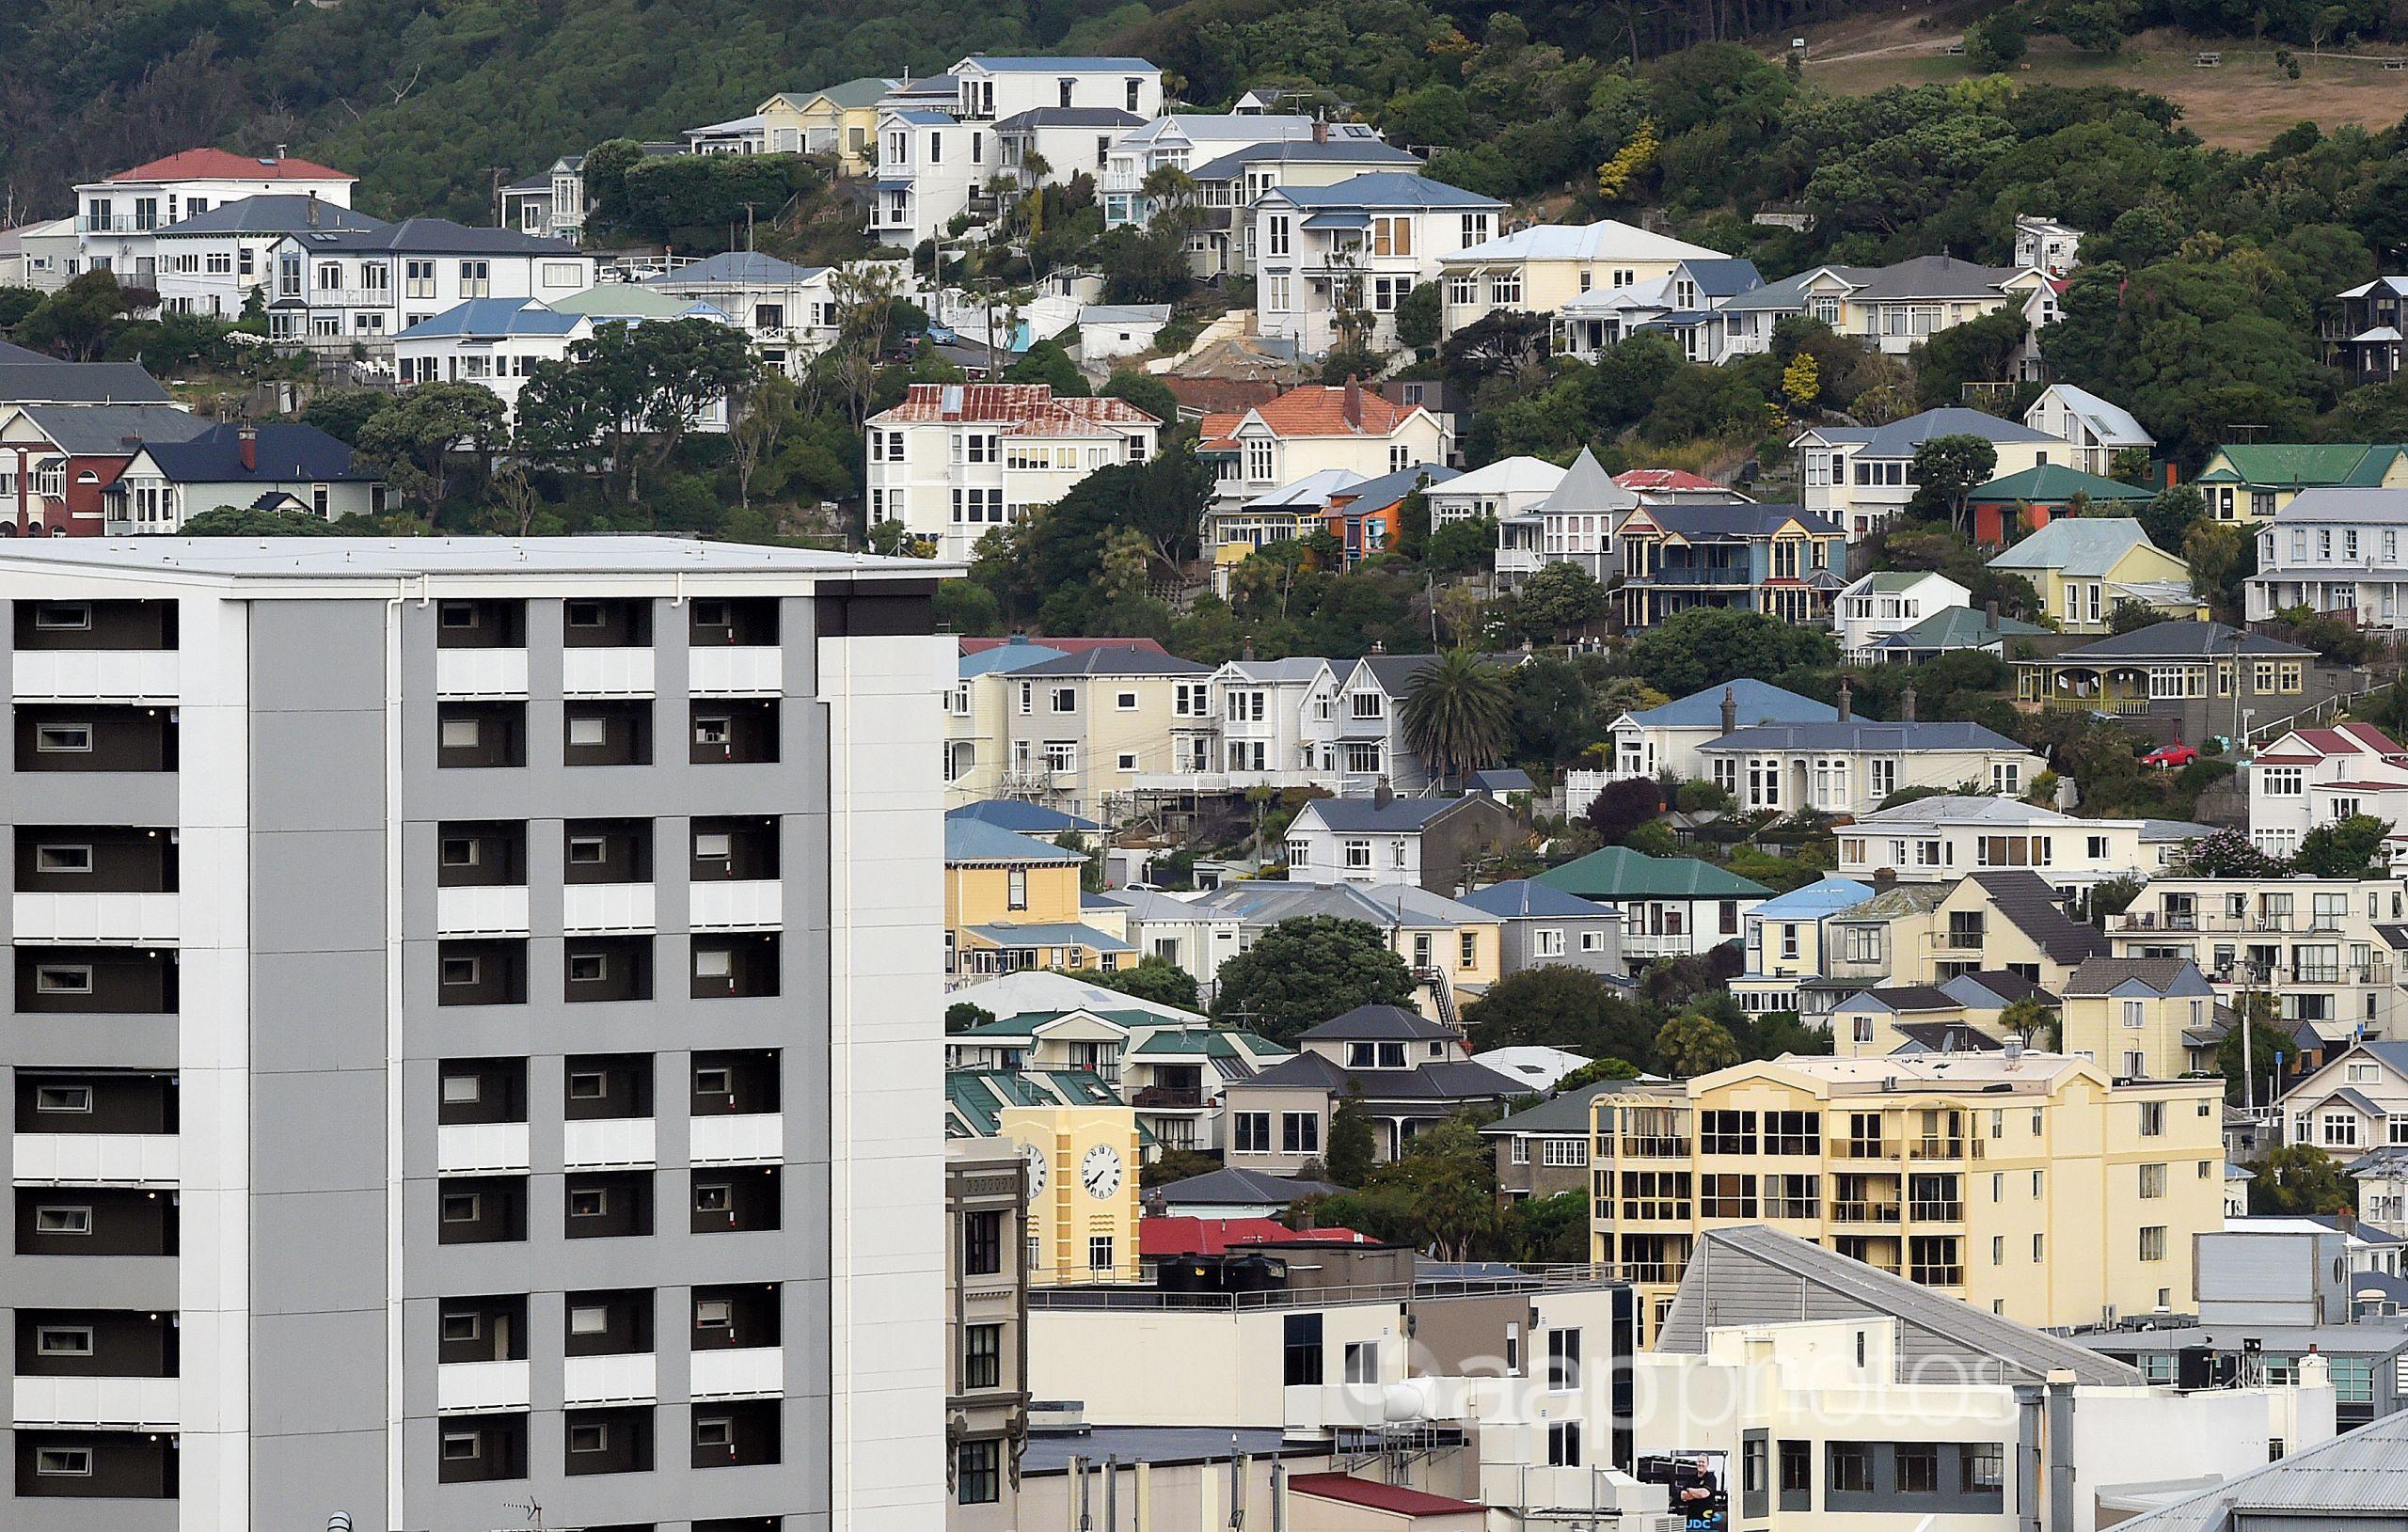 Housing in central Wellington